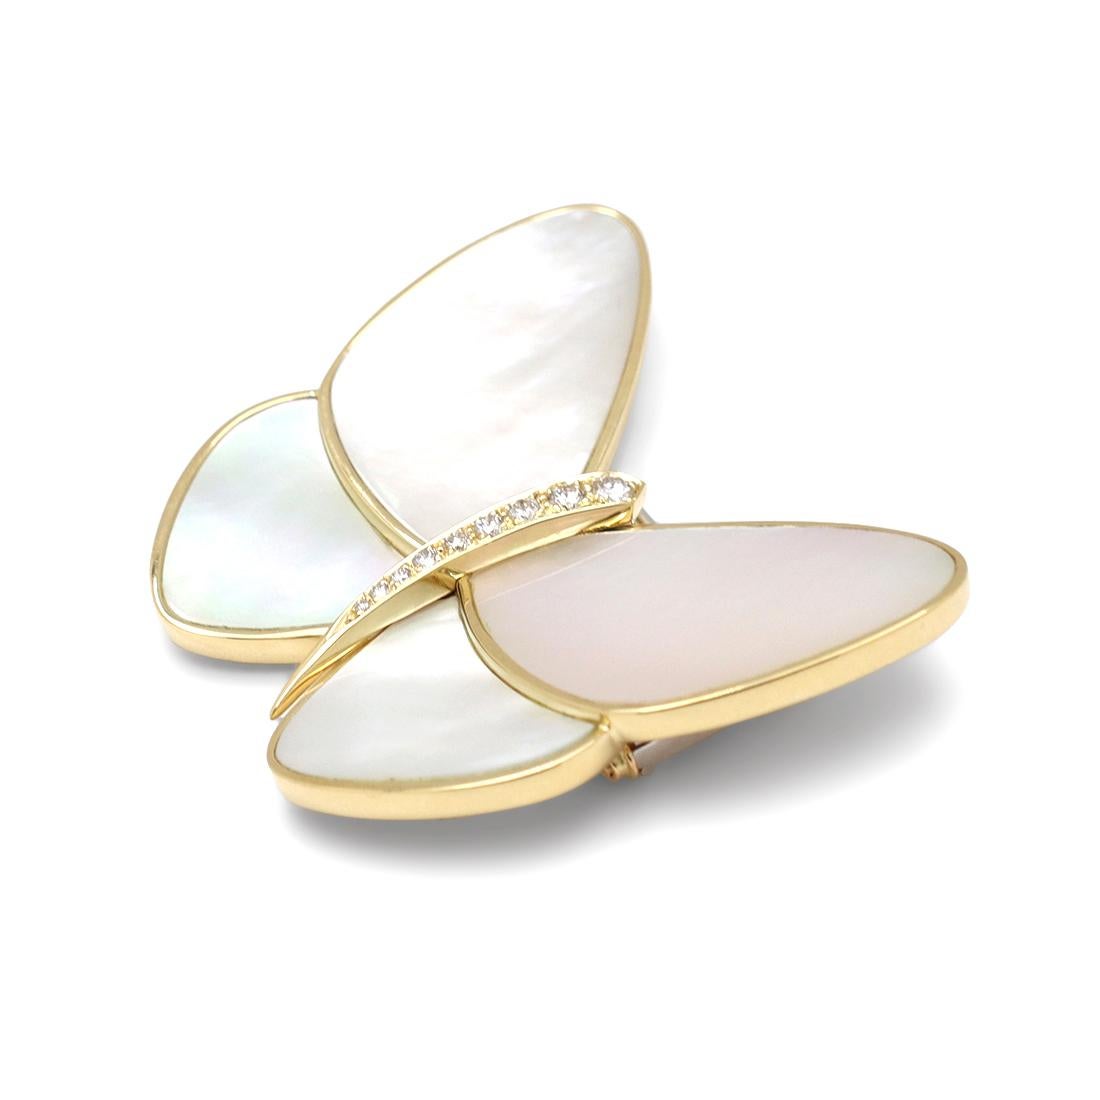 Brilliant Cut Van Cleef & Arpels Butterly Mother-of-Pearl and Diamond Pin